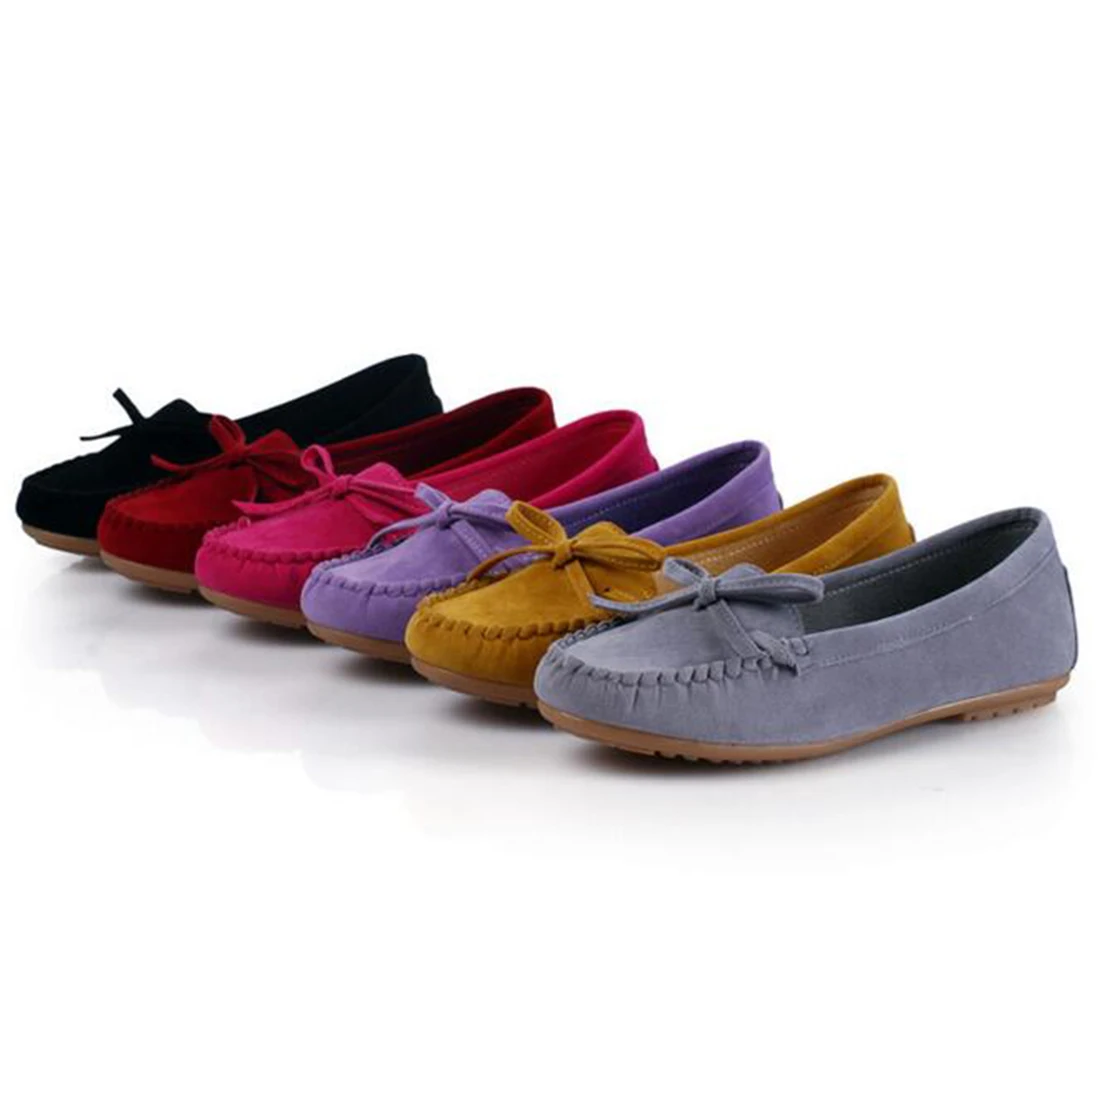 New Women Casual Flat Shoes Woman Ballet Flats Loafers Peas Fashion Bowtie Slip On Boats Soft Lazy Shoes,Blue,6.5